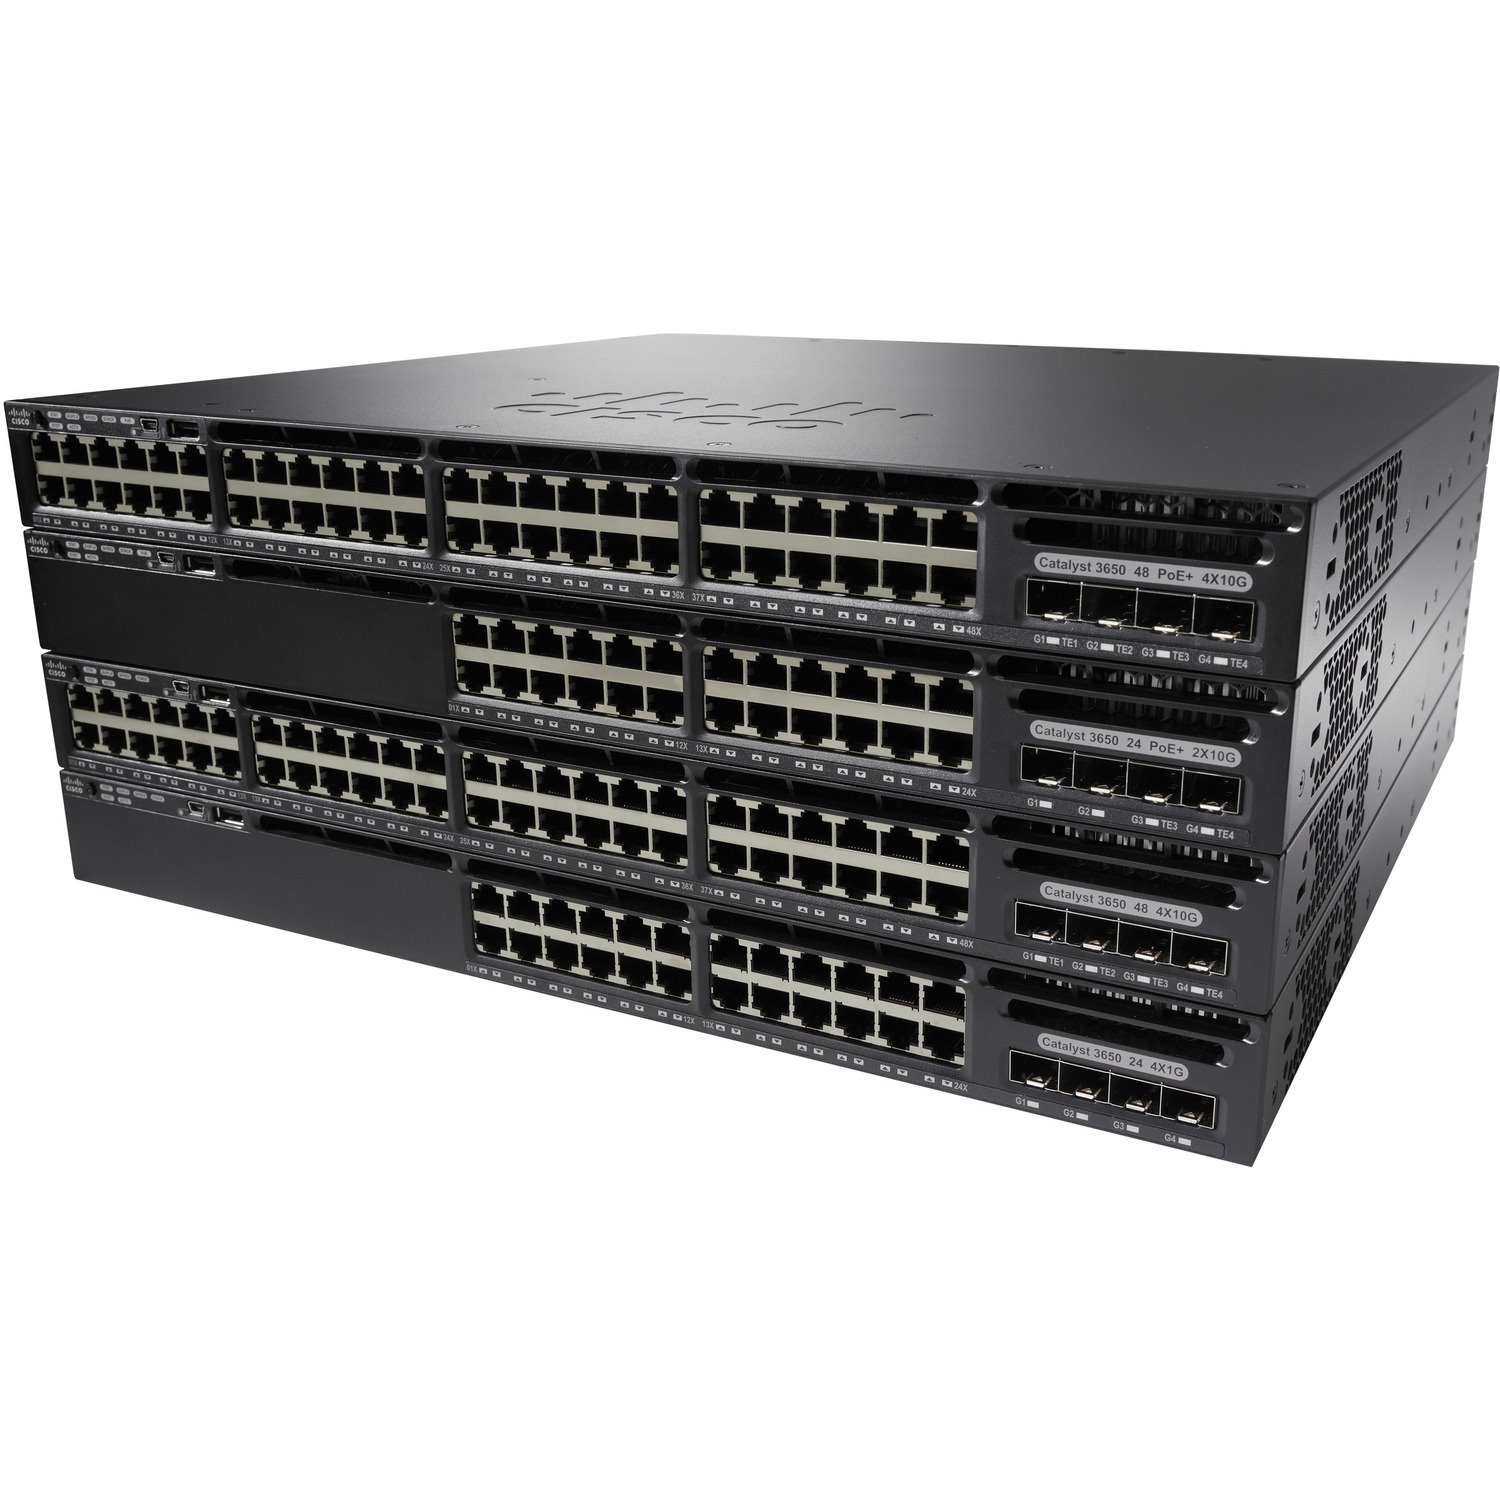 Cisco Catalyst 3650 WS3650-24PD 24 Ports Manageable Ethernet Switch - Gigabit Ethernet, 10 Gigabit Ethernet - 1000Base-T, 10GBase-X